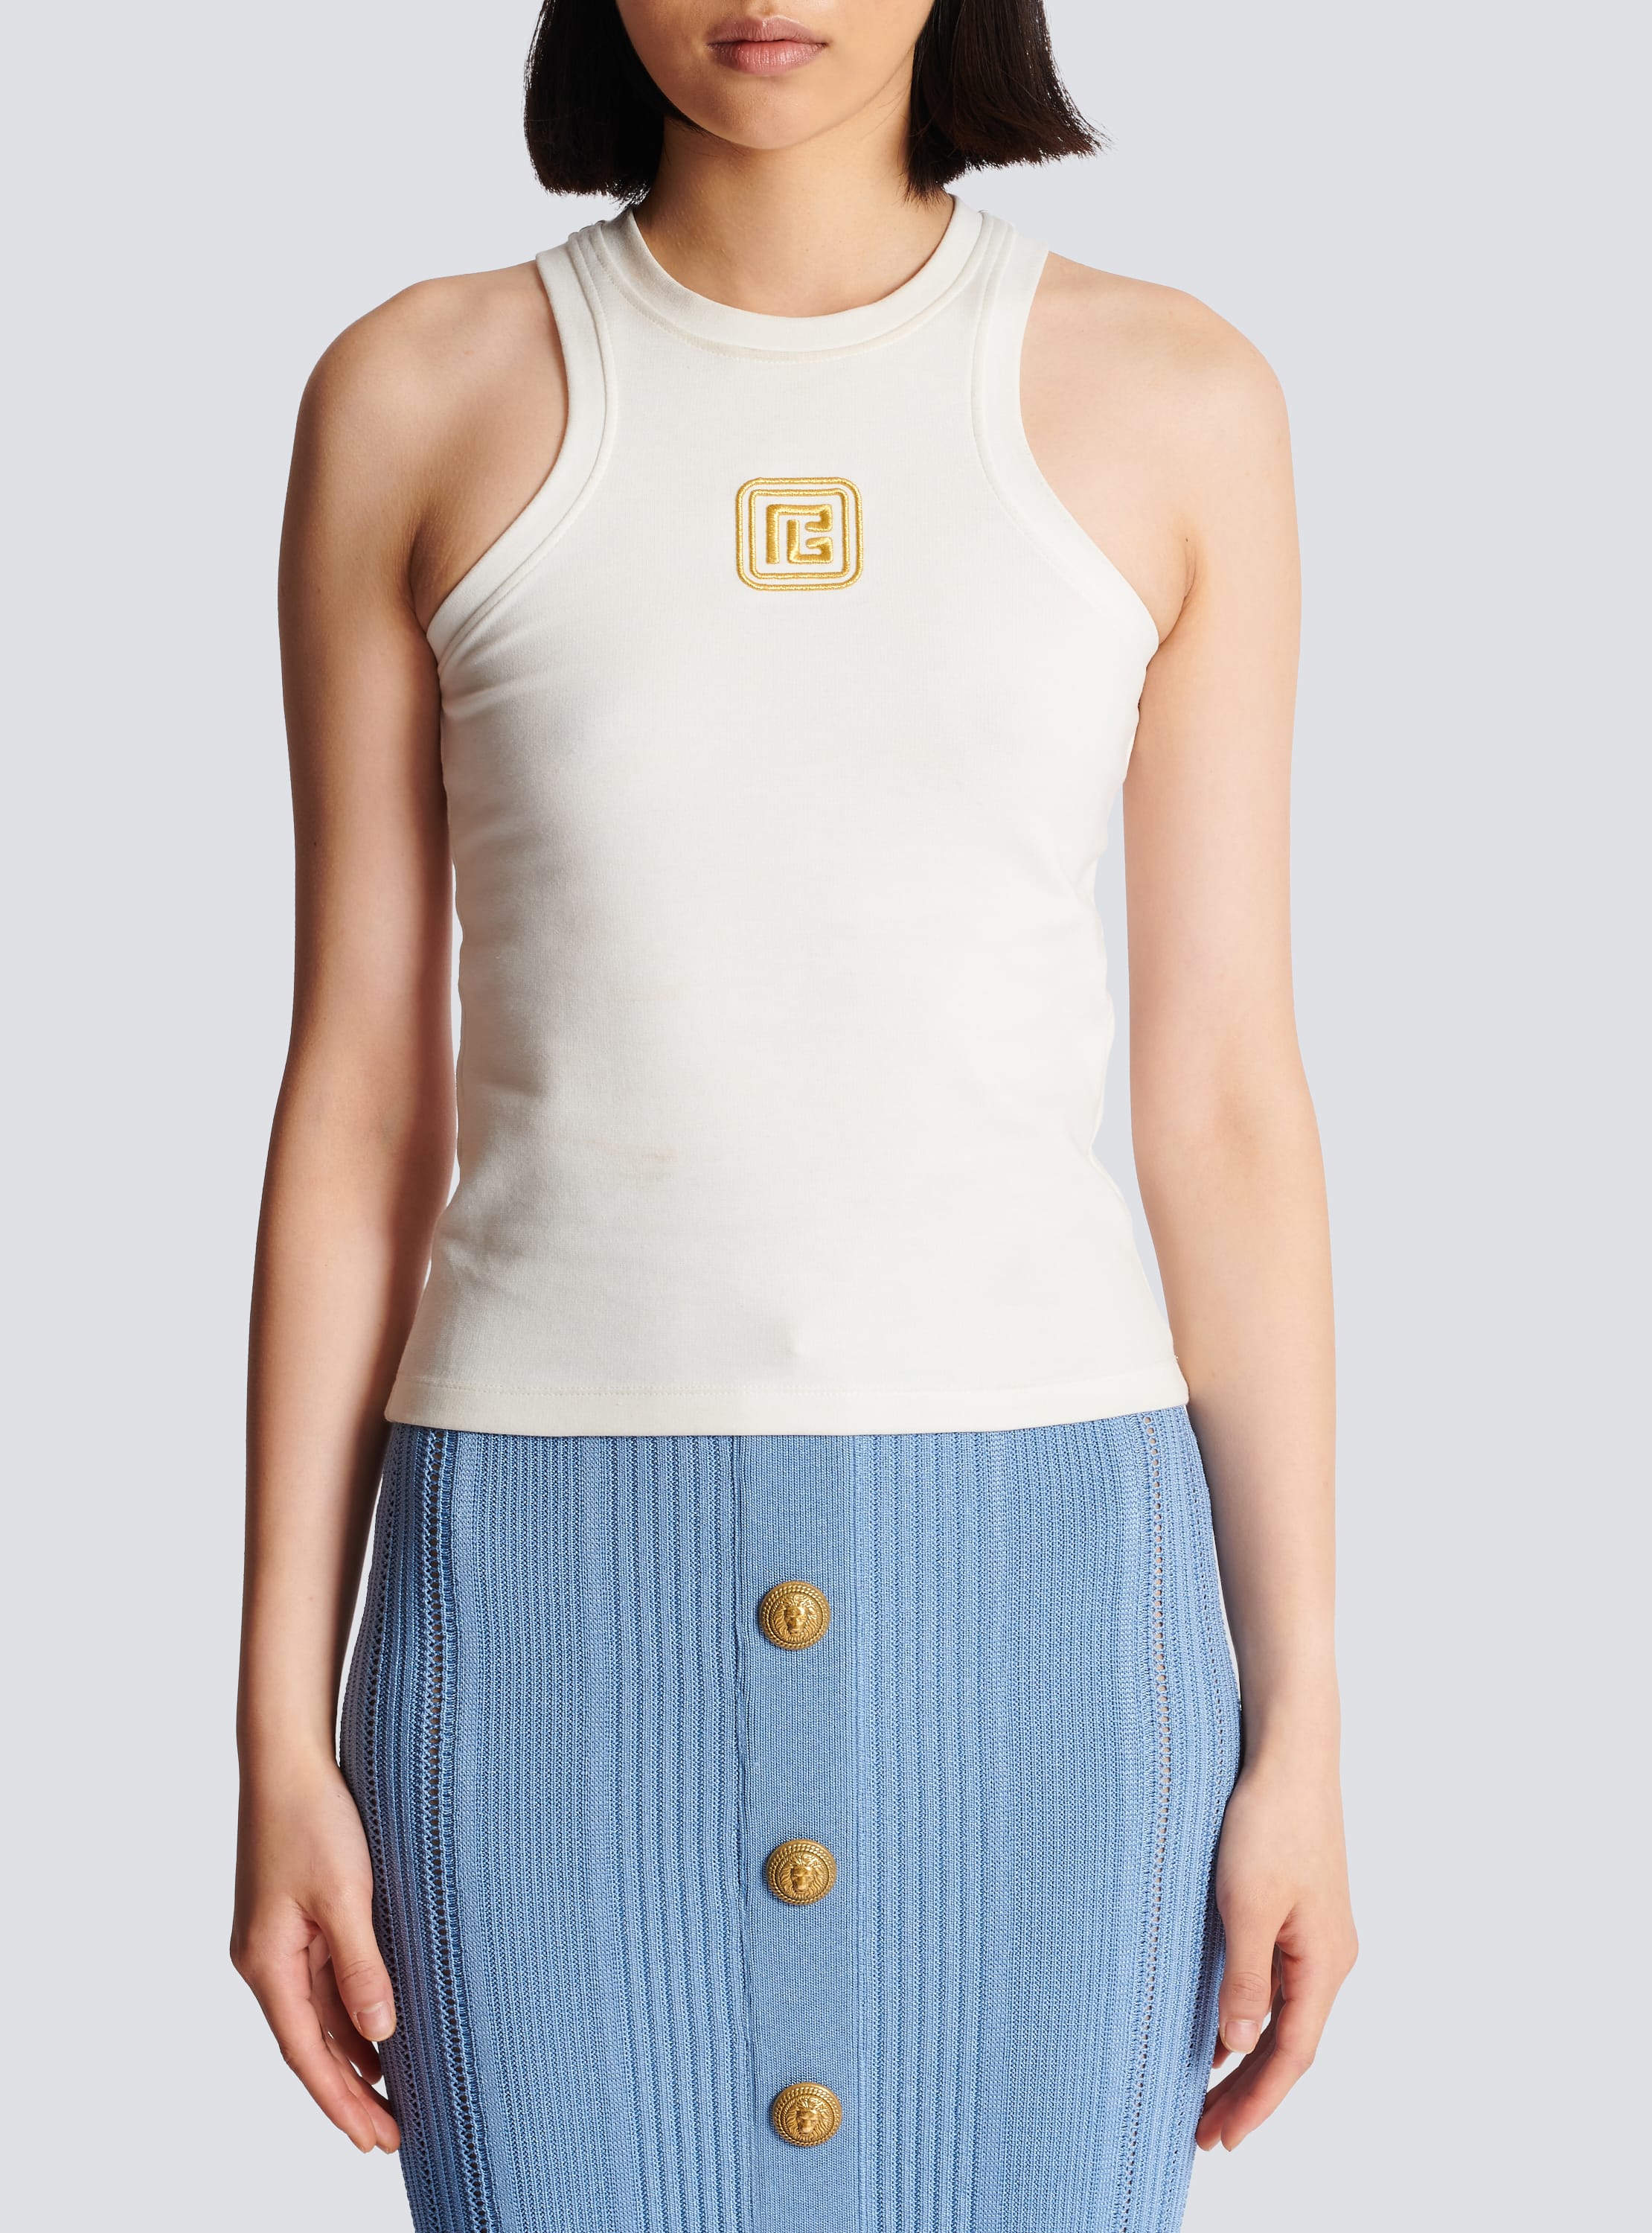 PB embroidered tank top white - Women